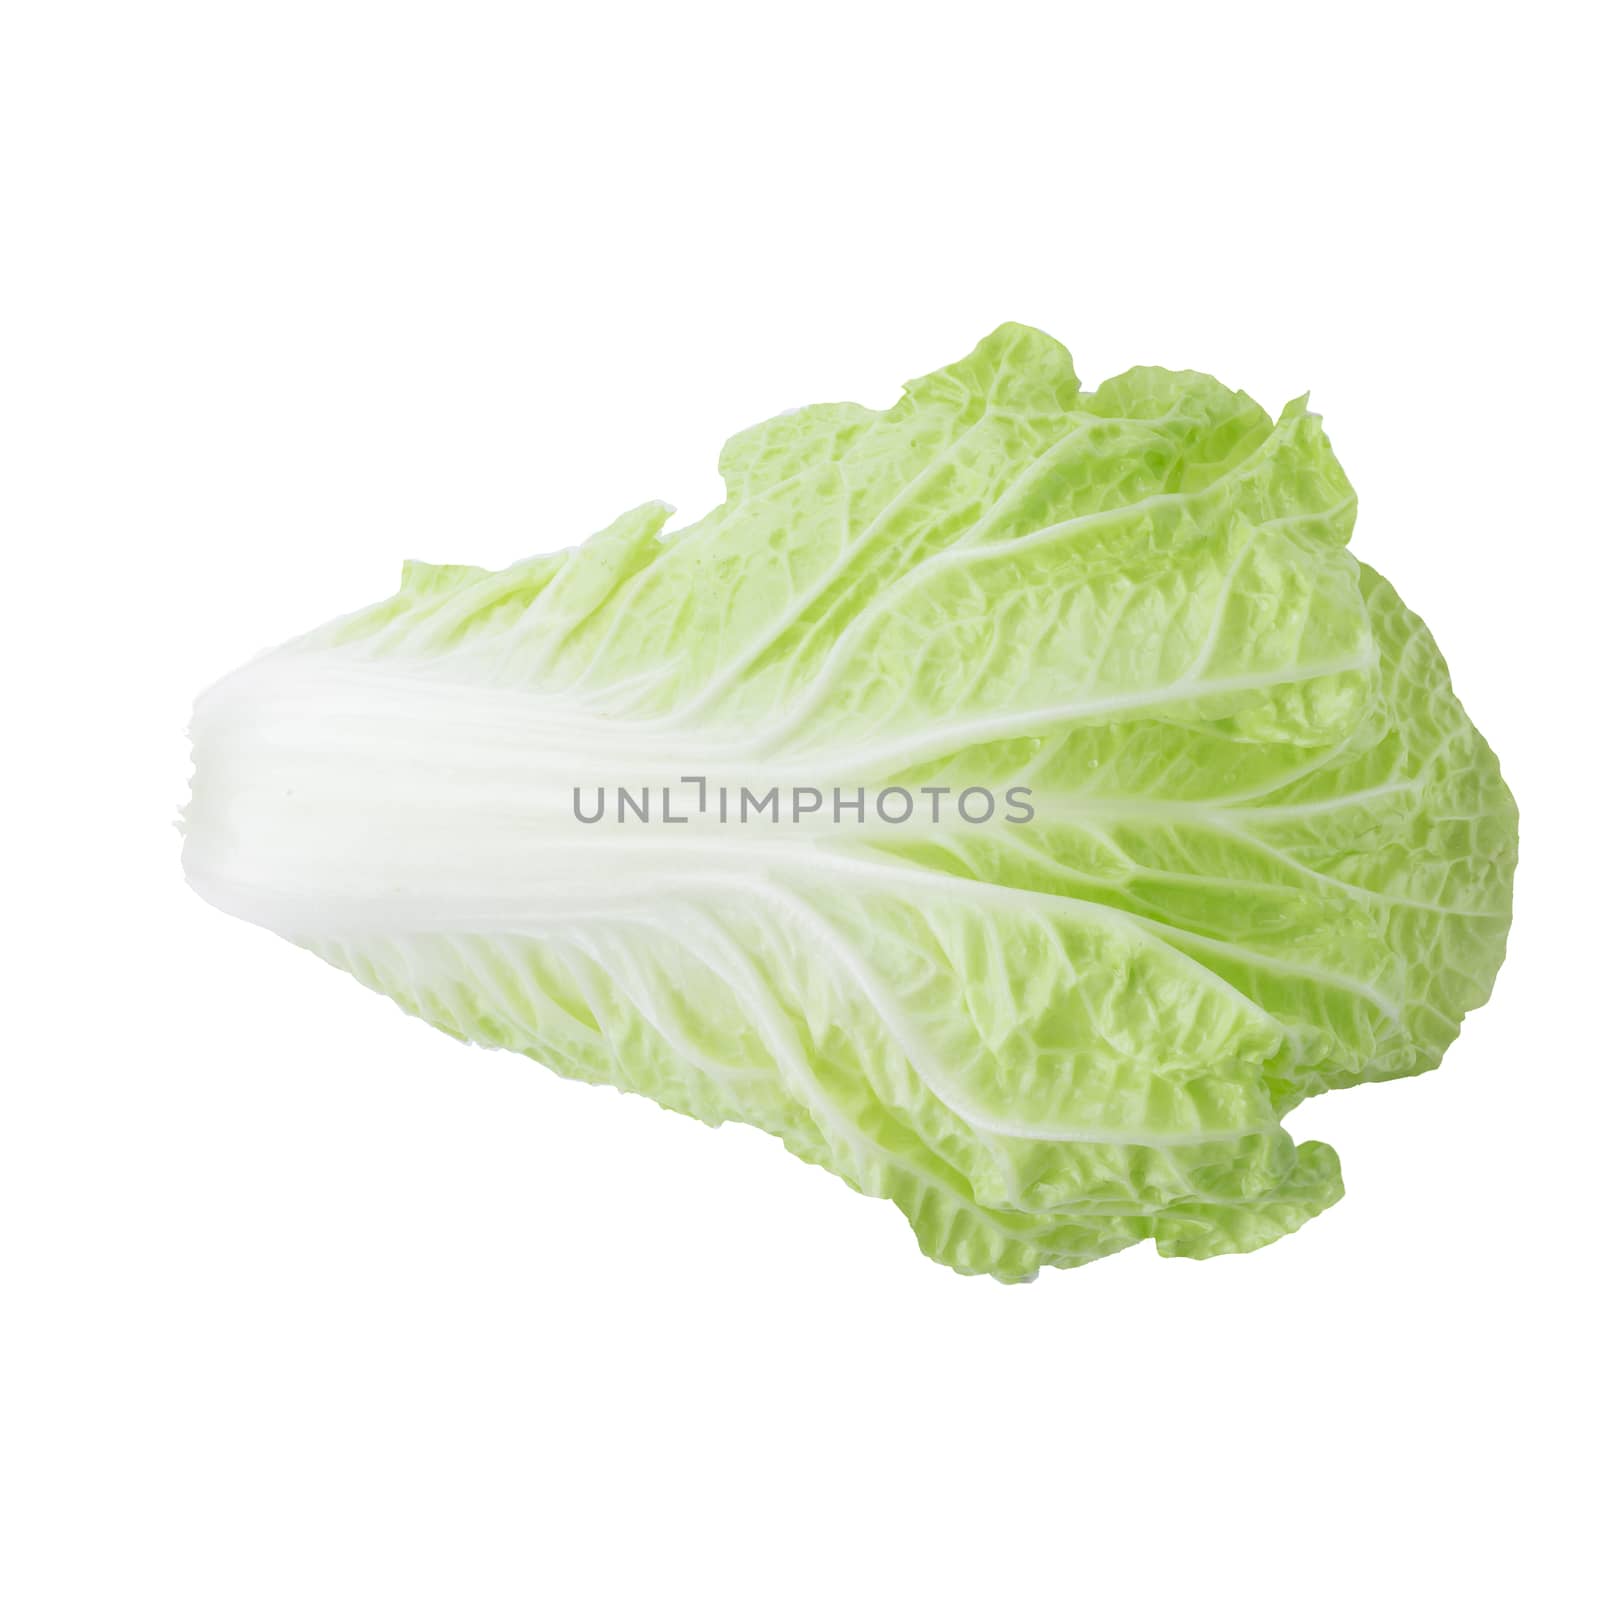 fresh chinese cabbage isolated on a white background.